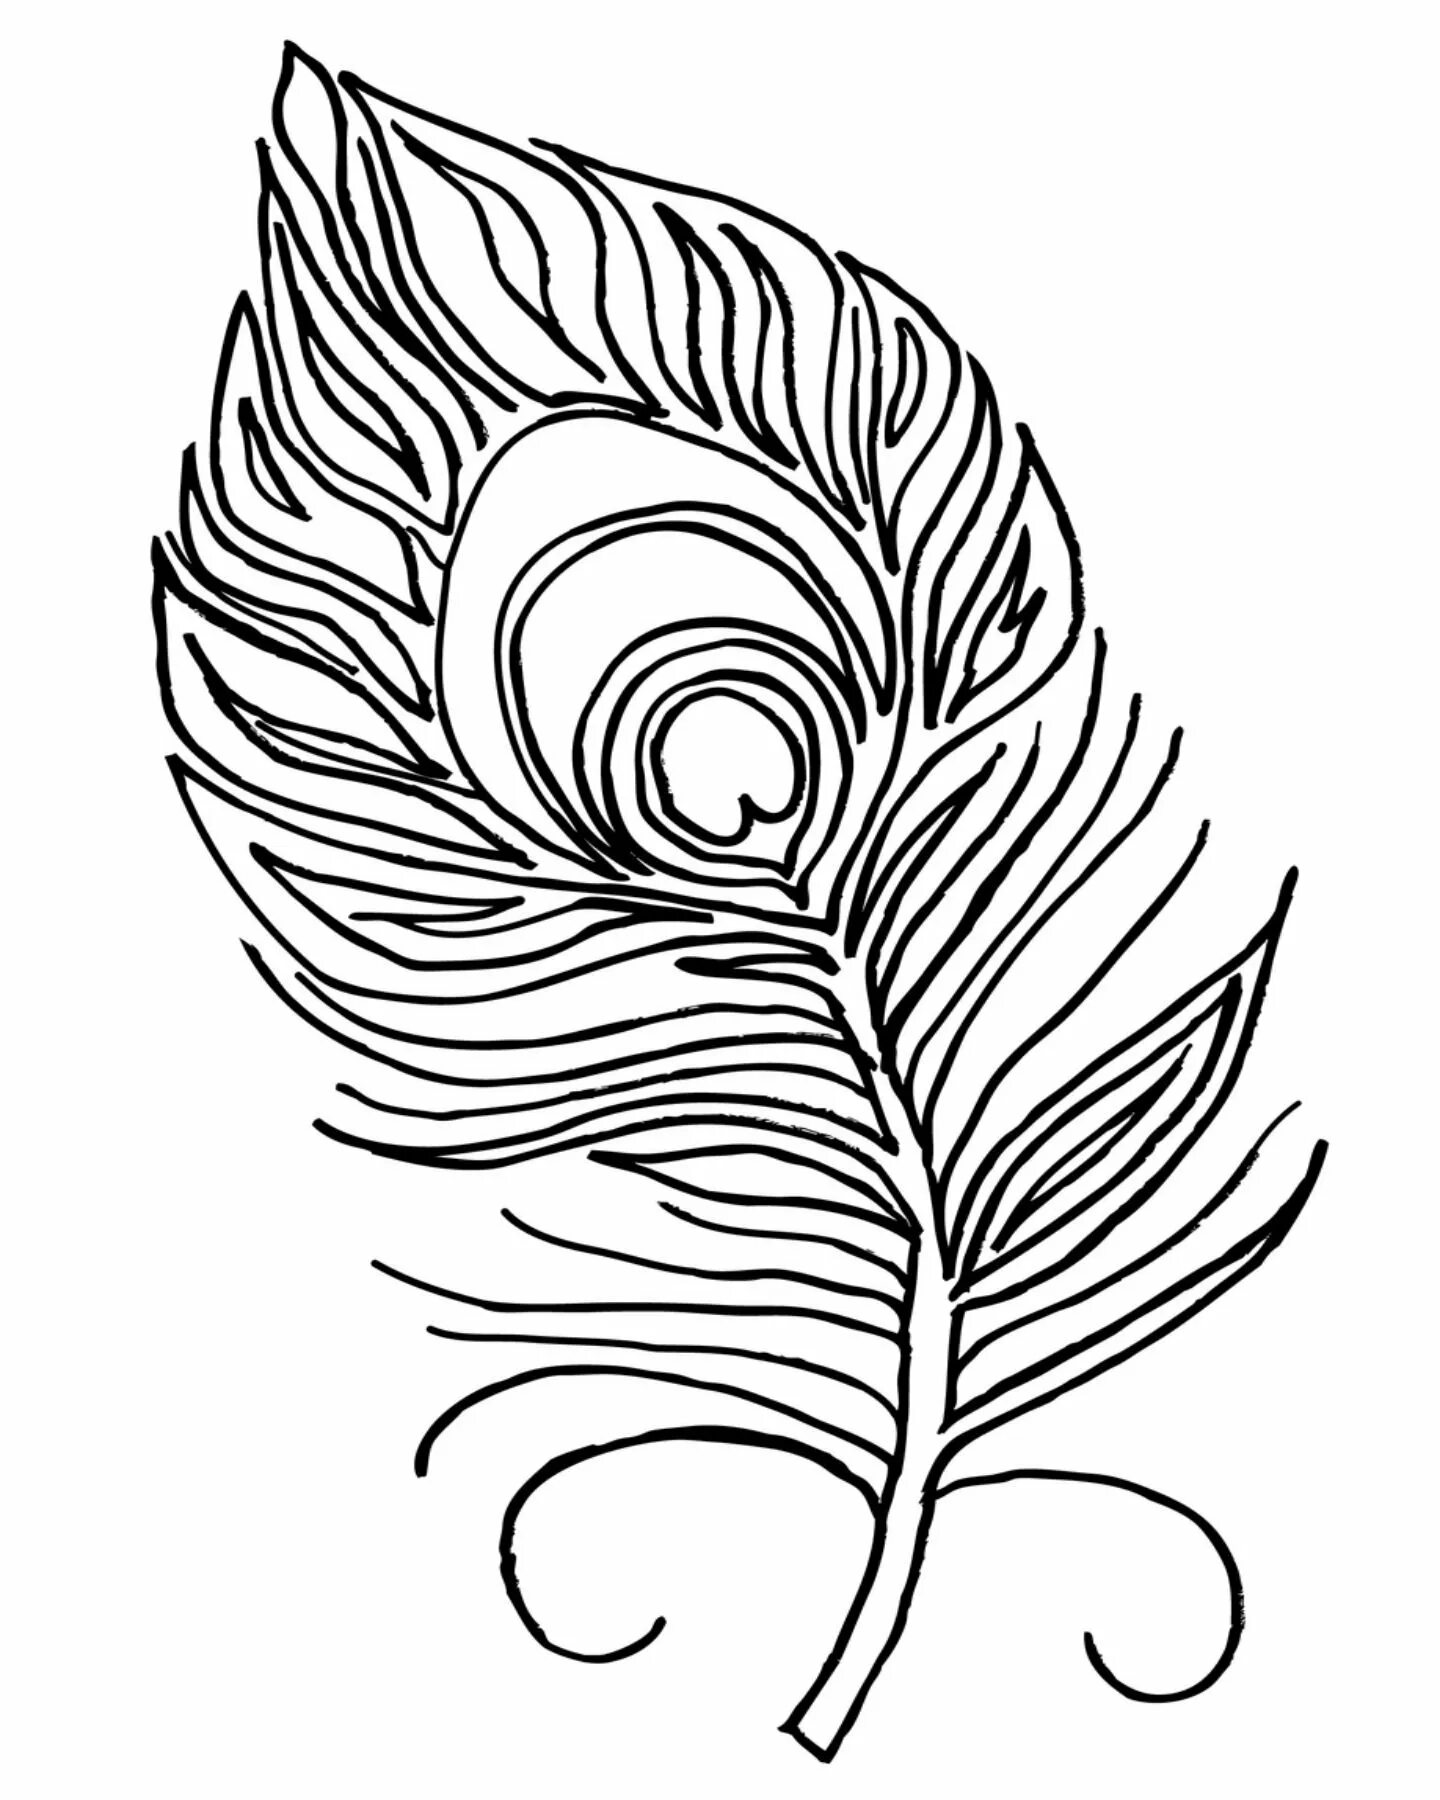 Coloring book daring feathered firebird for kids